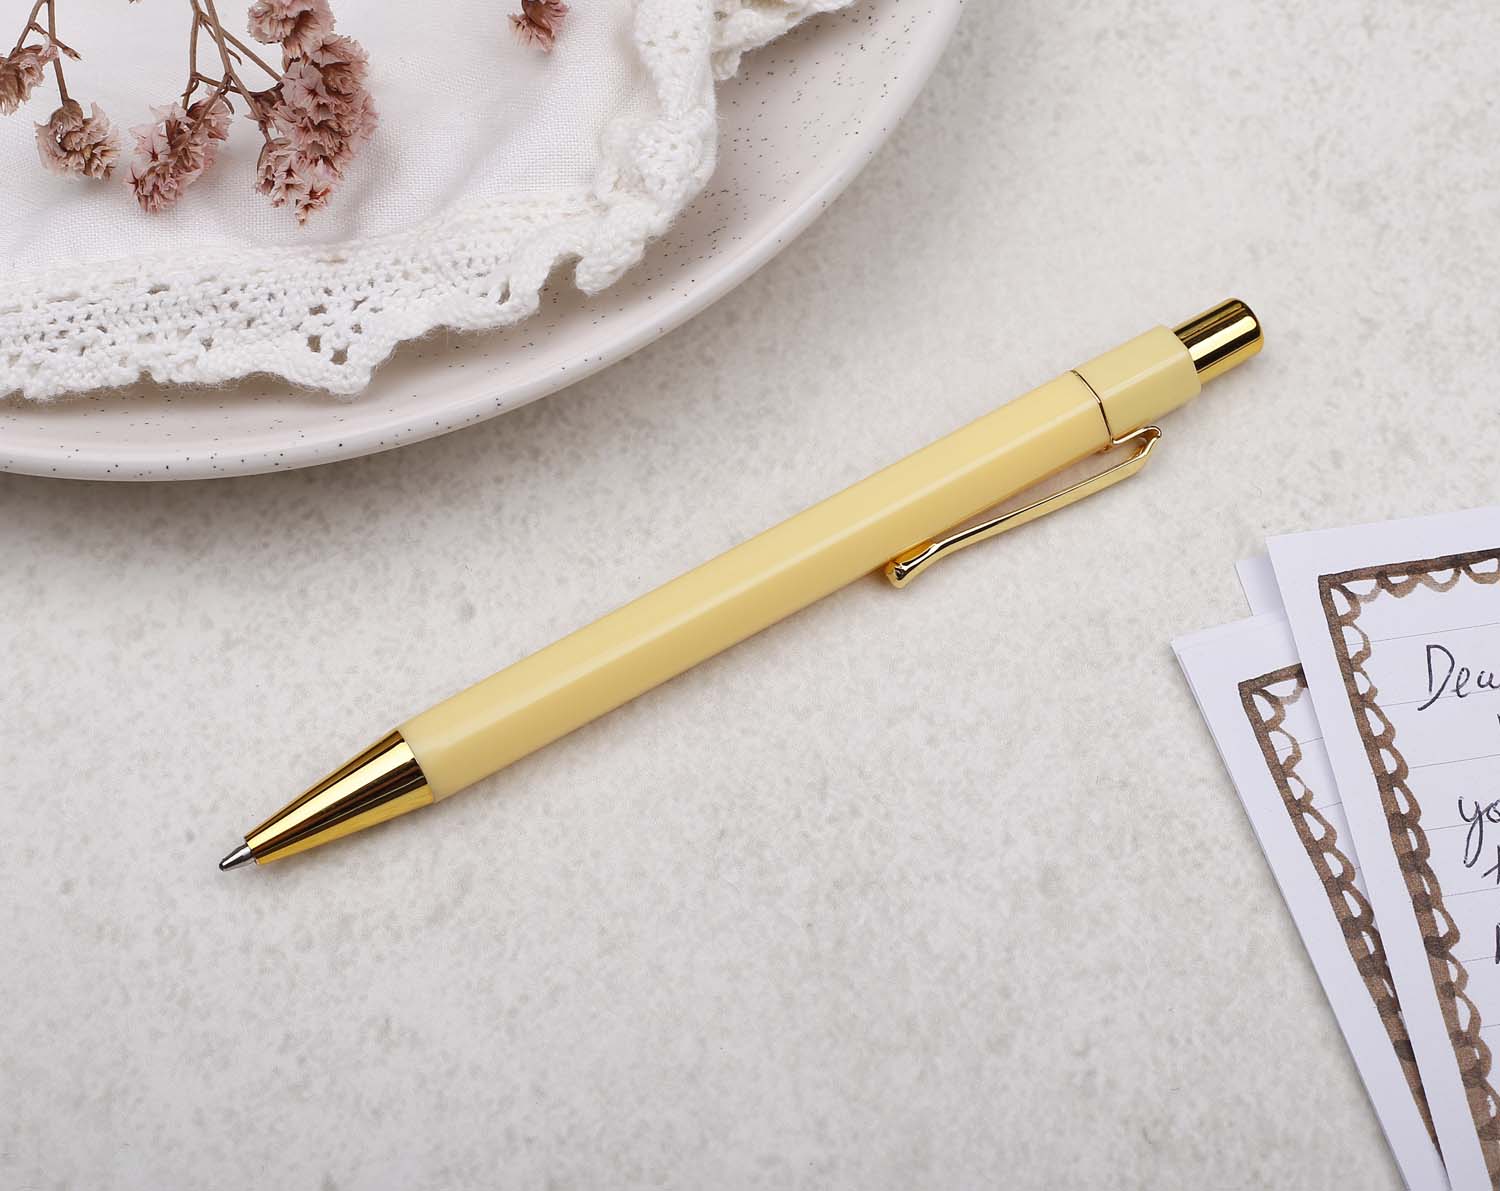 A premium yellow and gold pen with ballpoint tip and hexagonal barrel detail